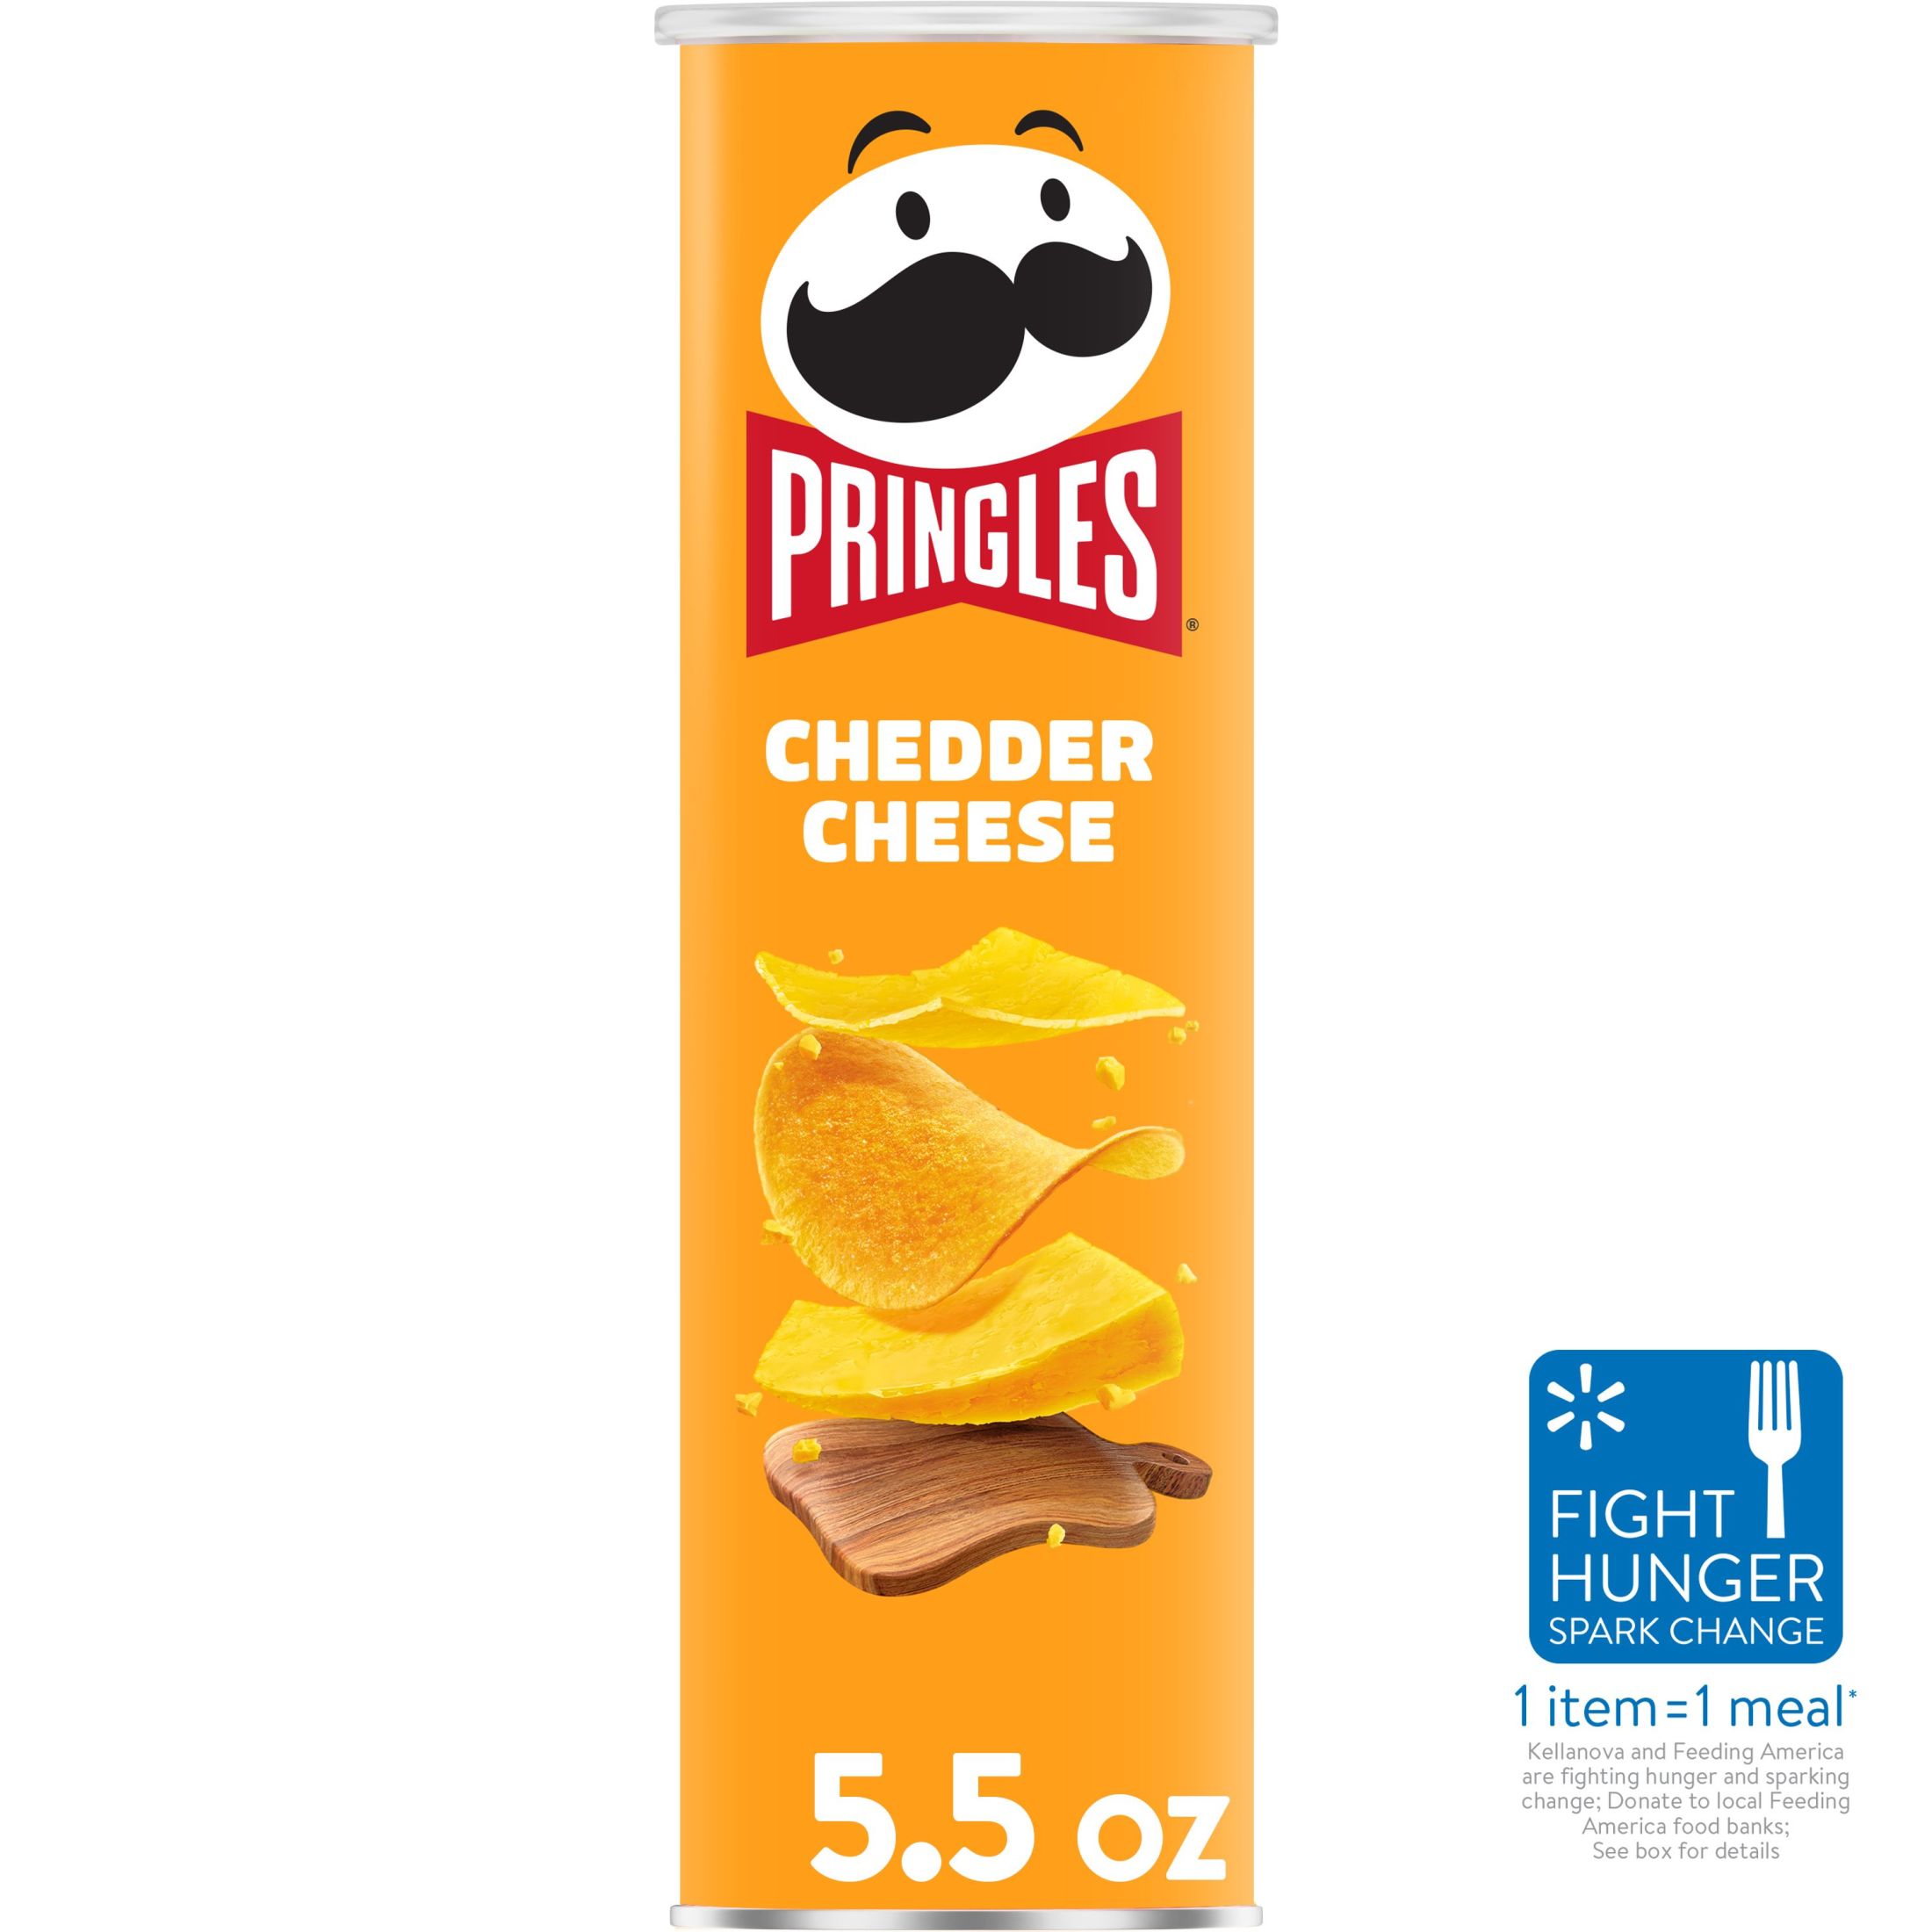 Pringles Cheddar Cheese Potato Crisps Chips, Lunch Snacks, 5.5 oz - image 1 of 14